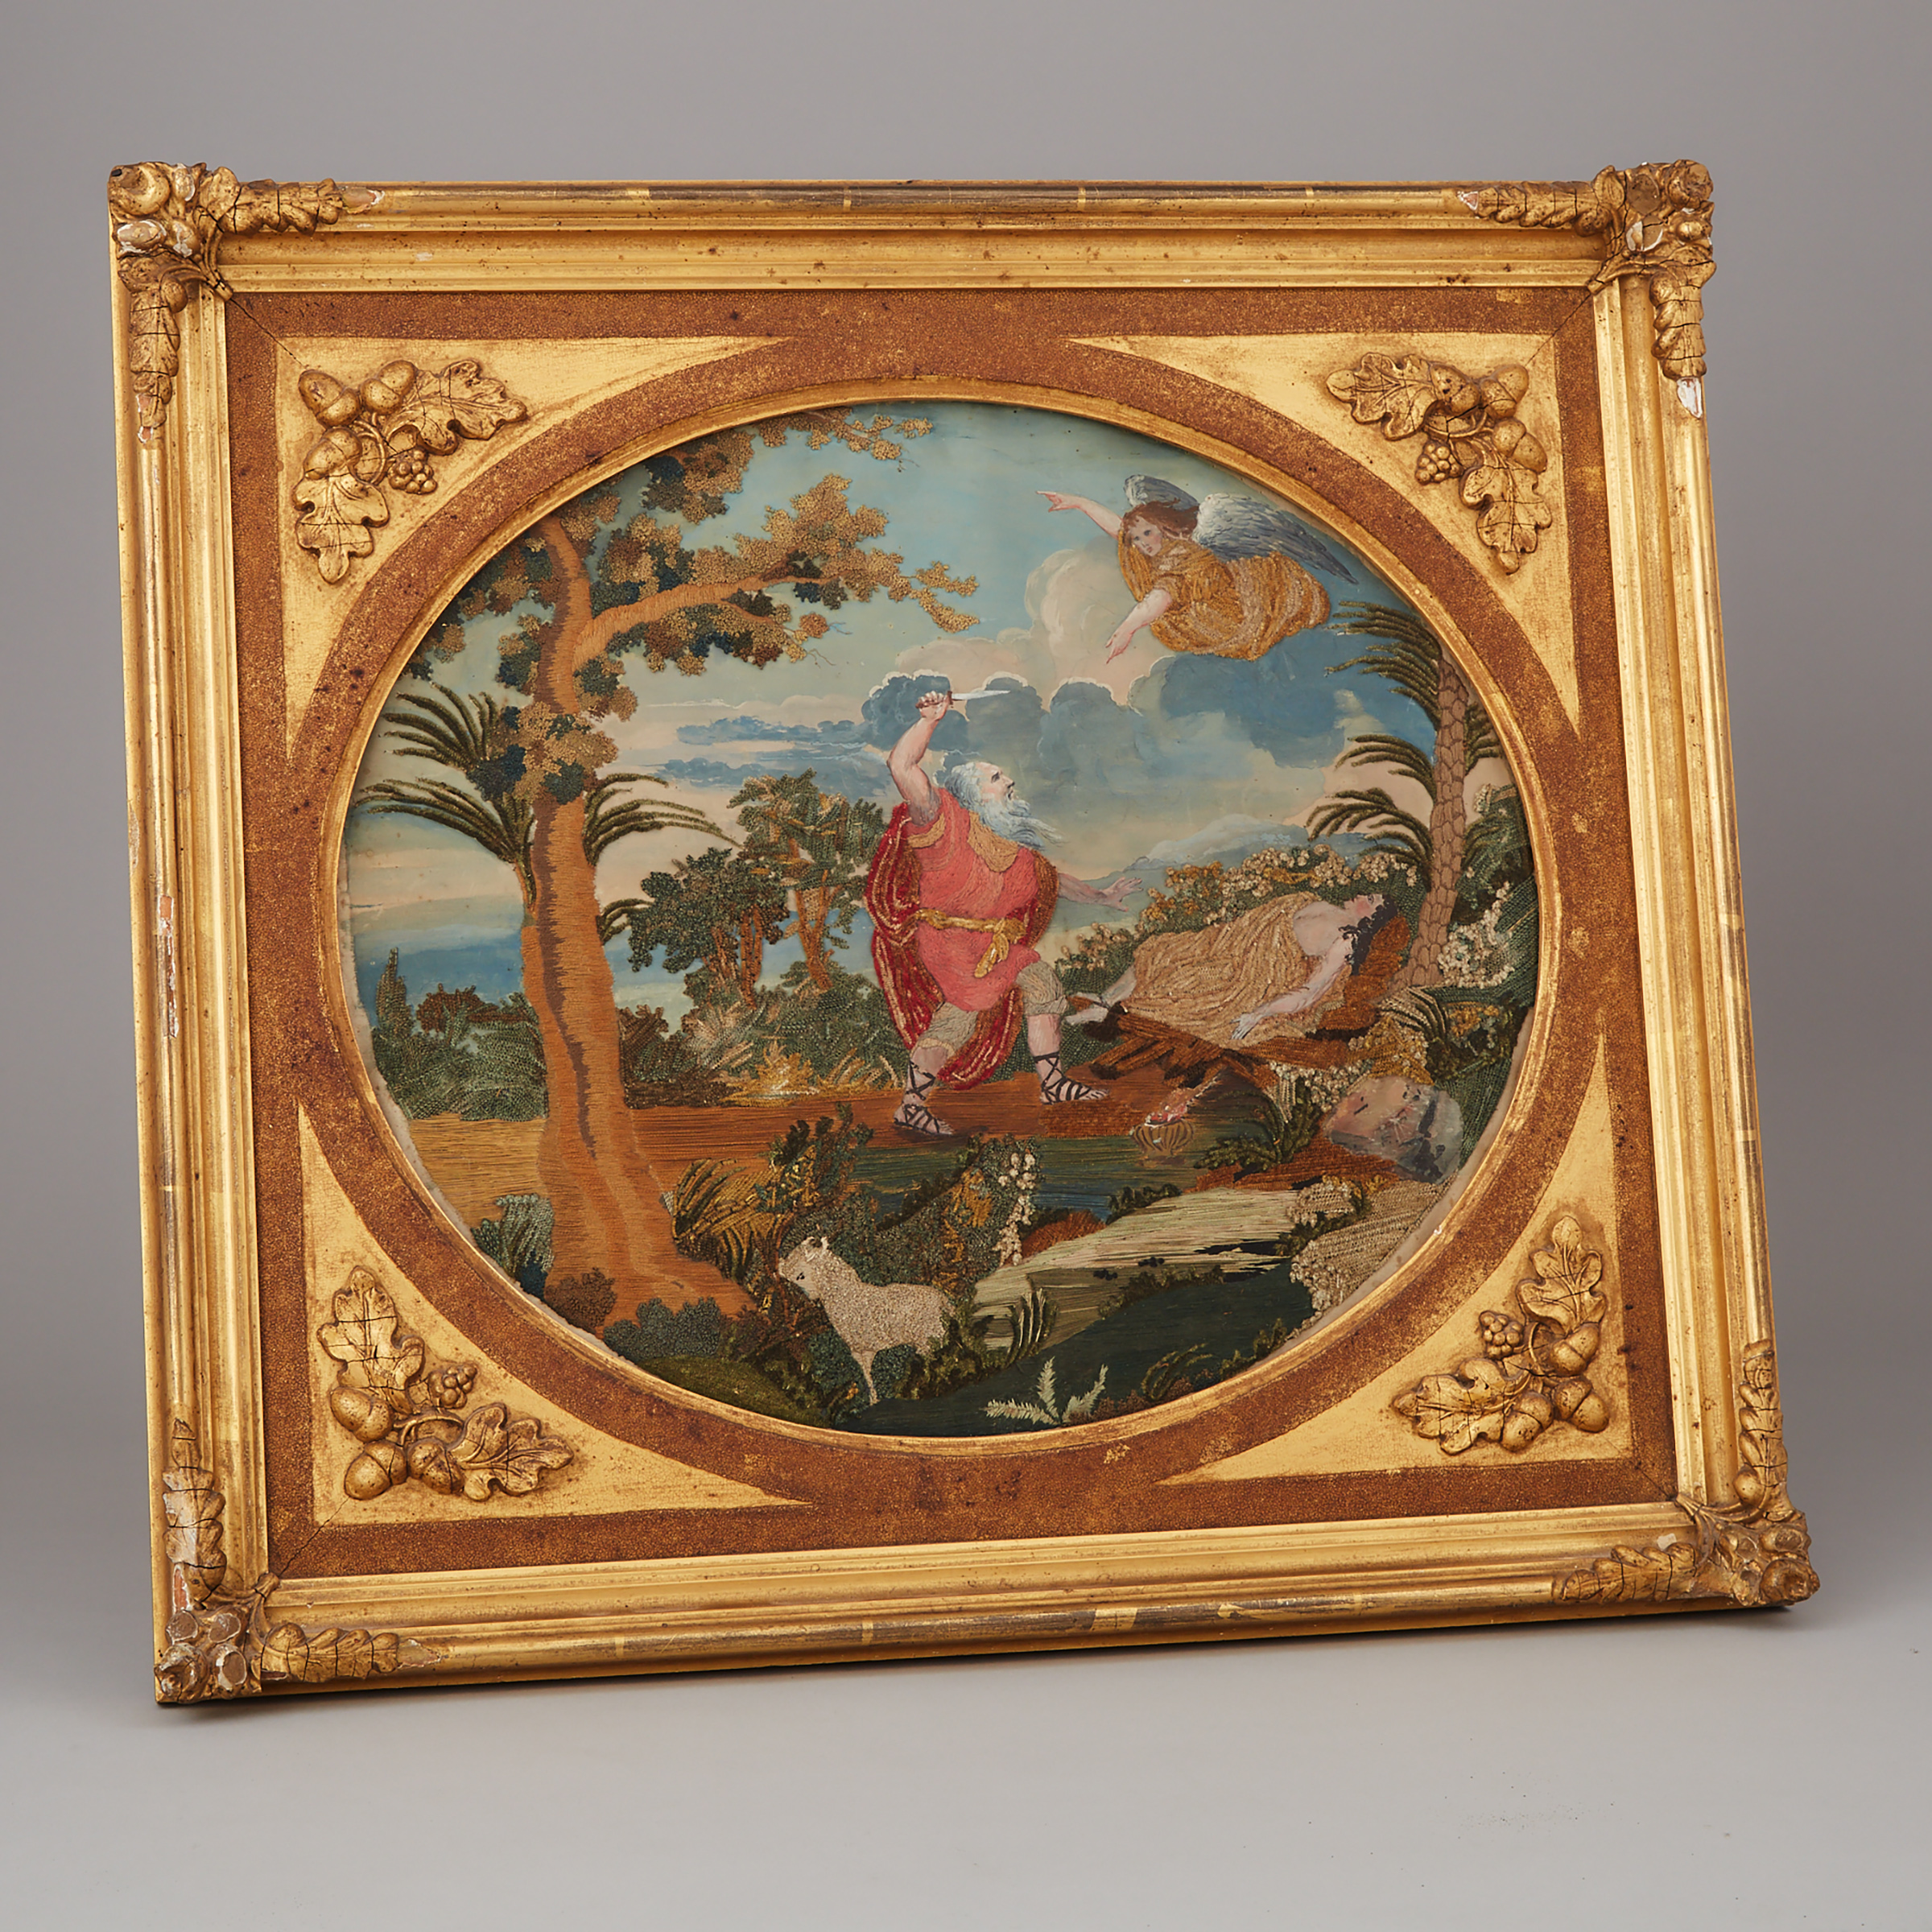 Georgian Stump Work and Painted Silk Picture, late 18th century